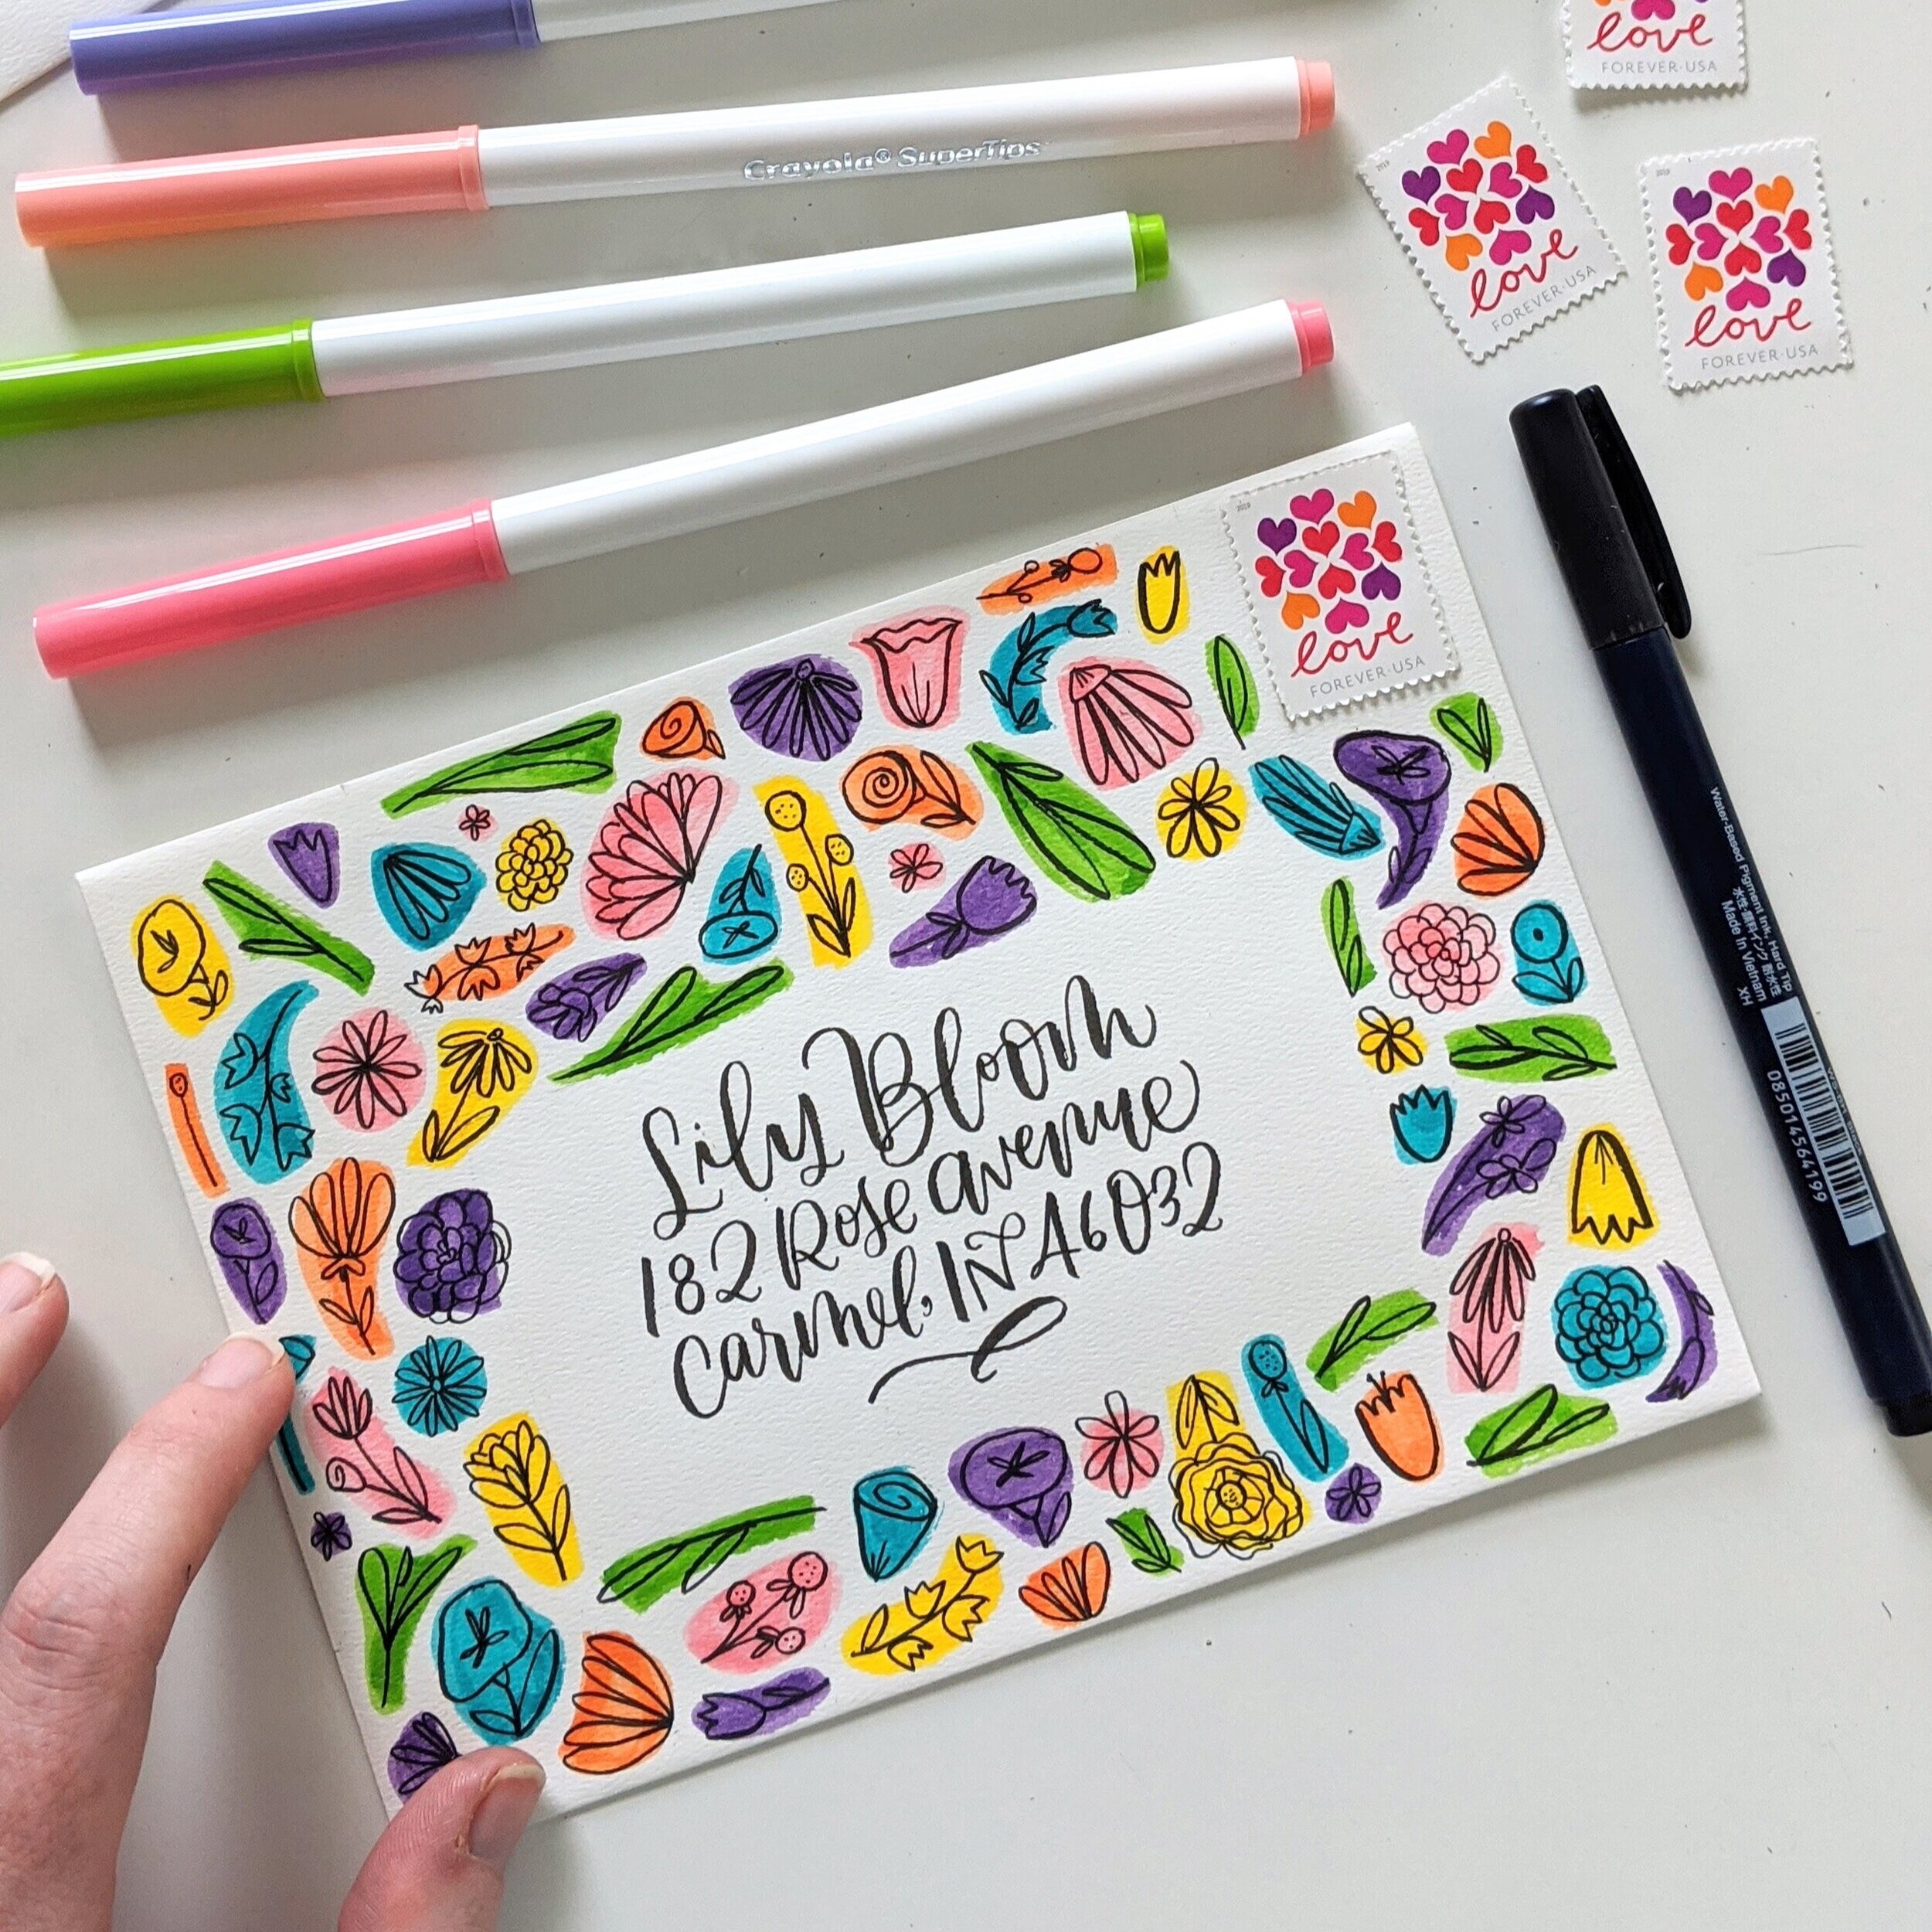 What's inside your pencil case? - Mailart, handmade & stationery